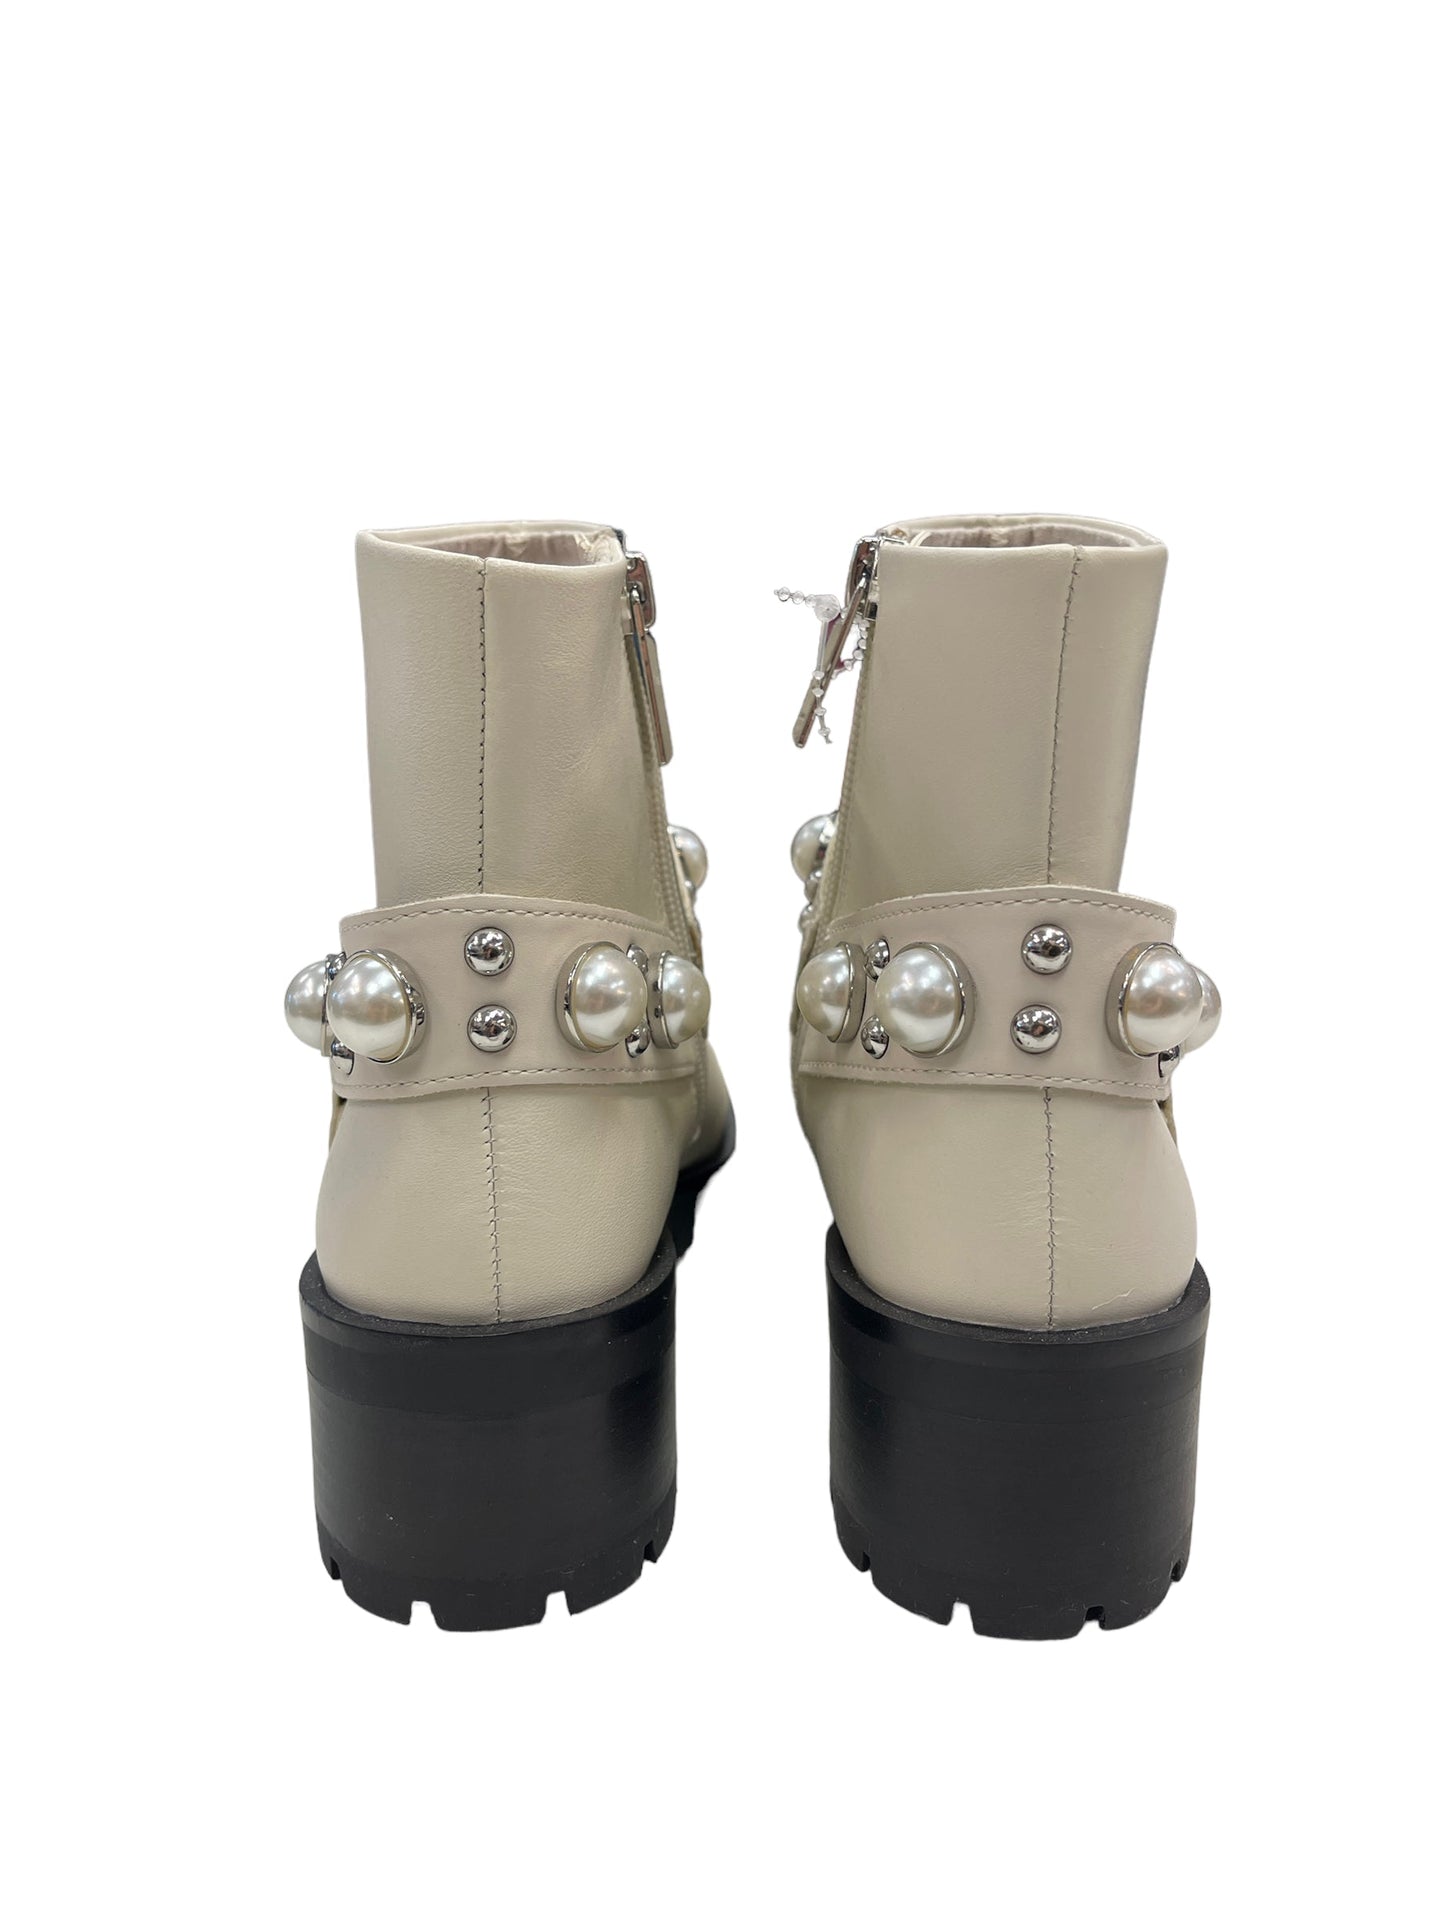 Boots Designer By Karl Lagerfeld  Size: 6